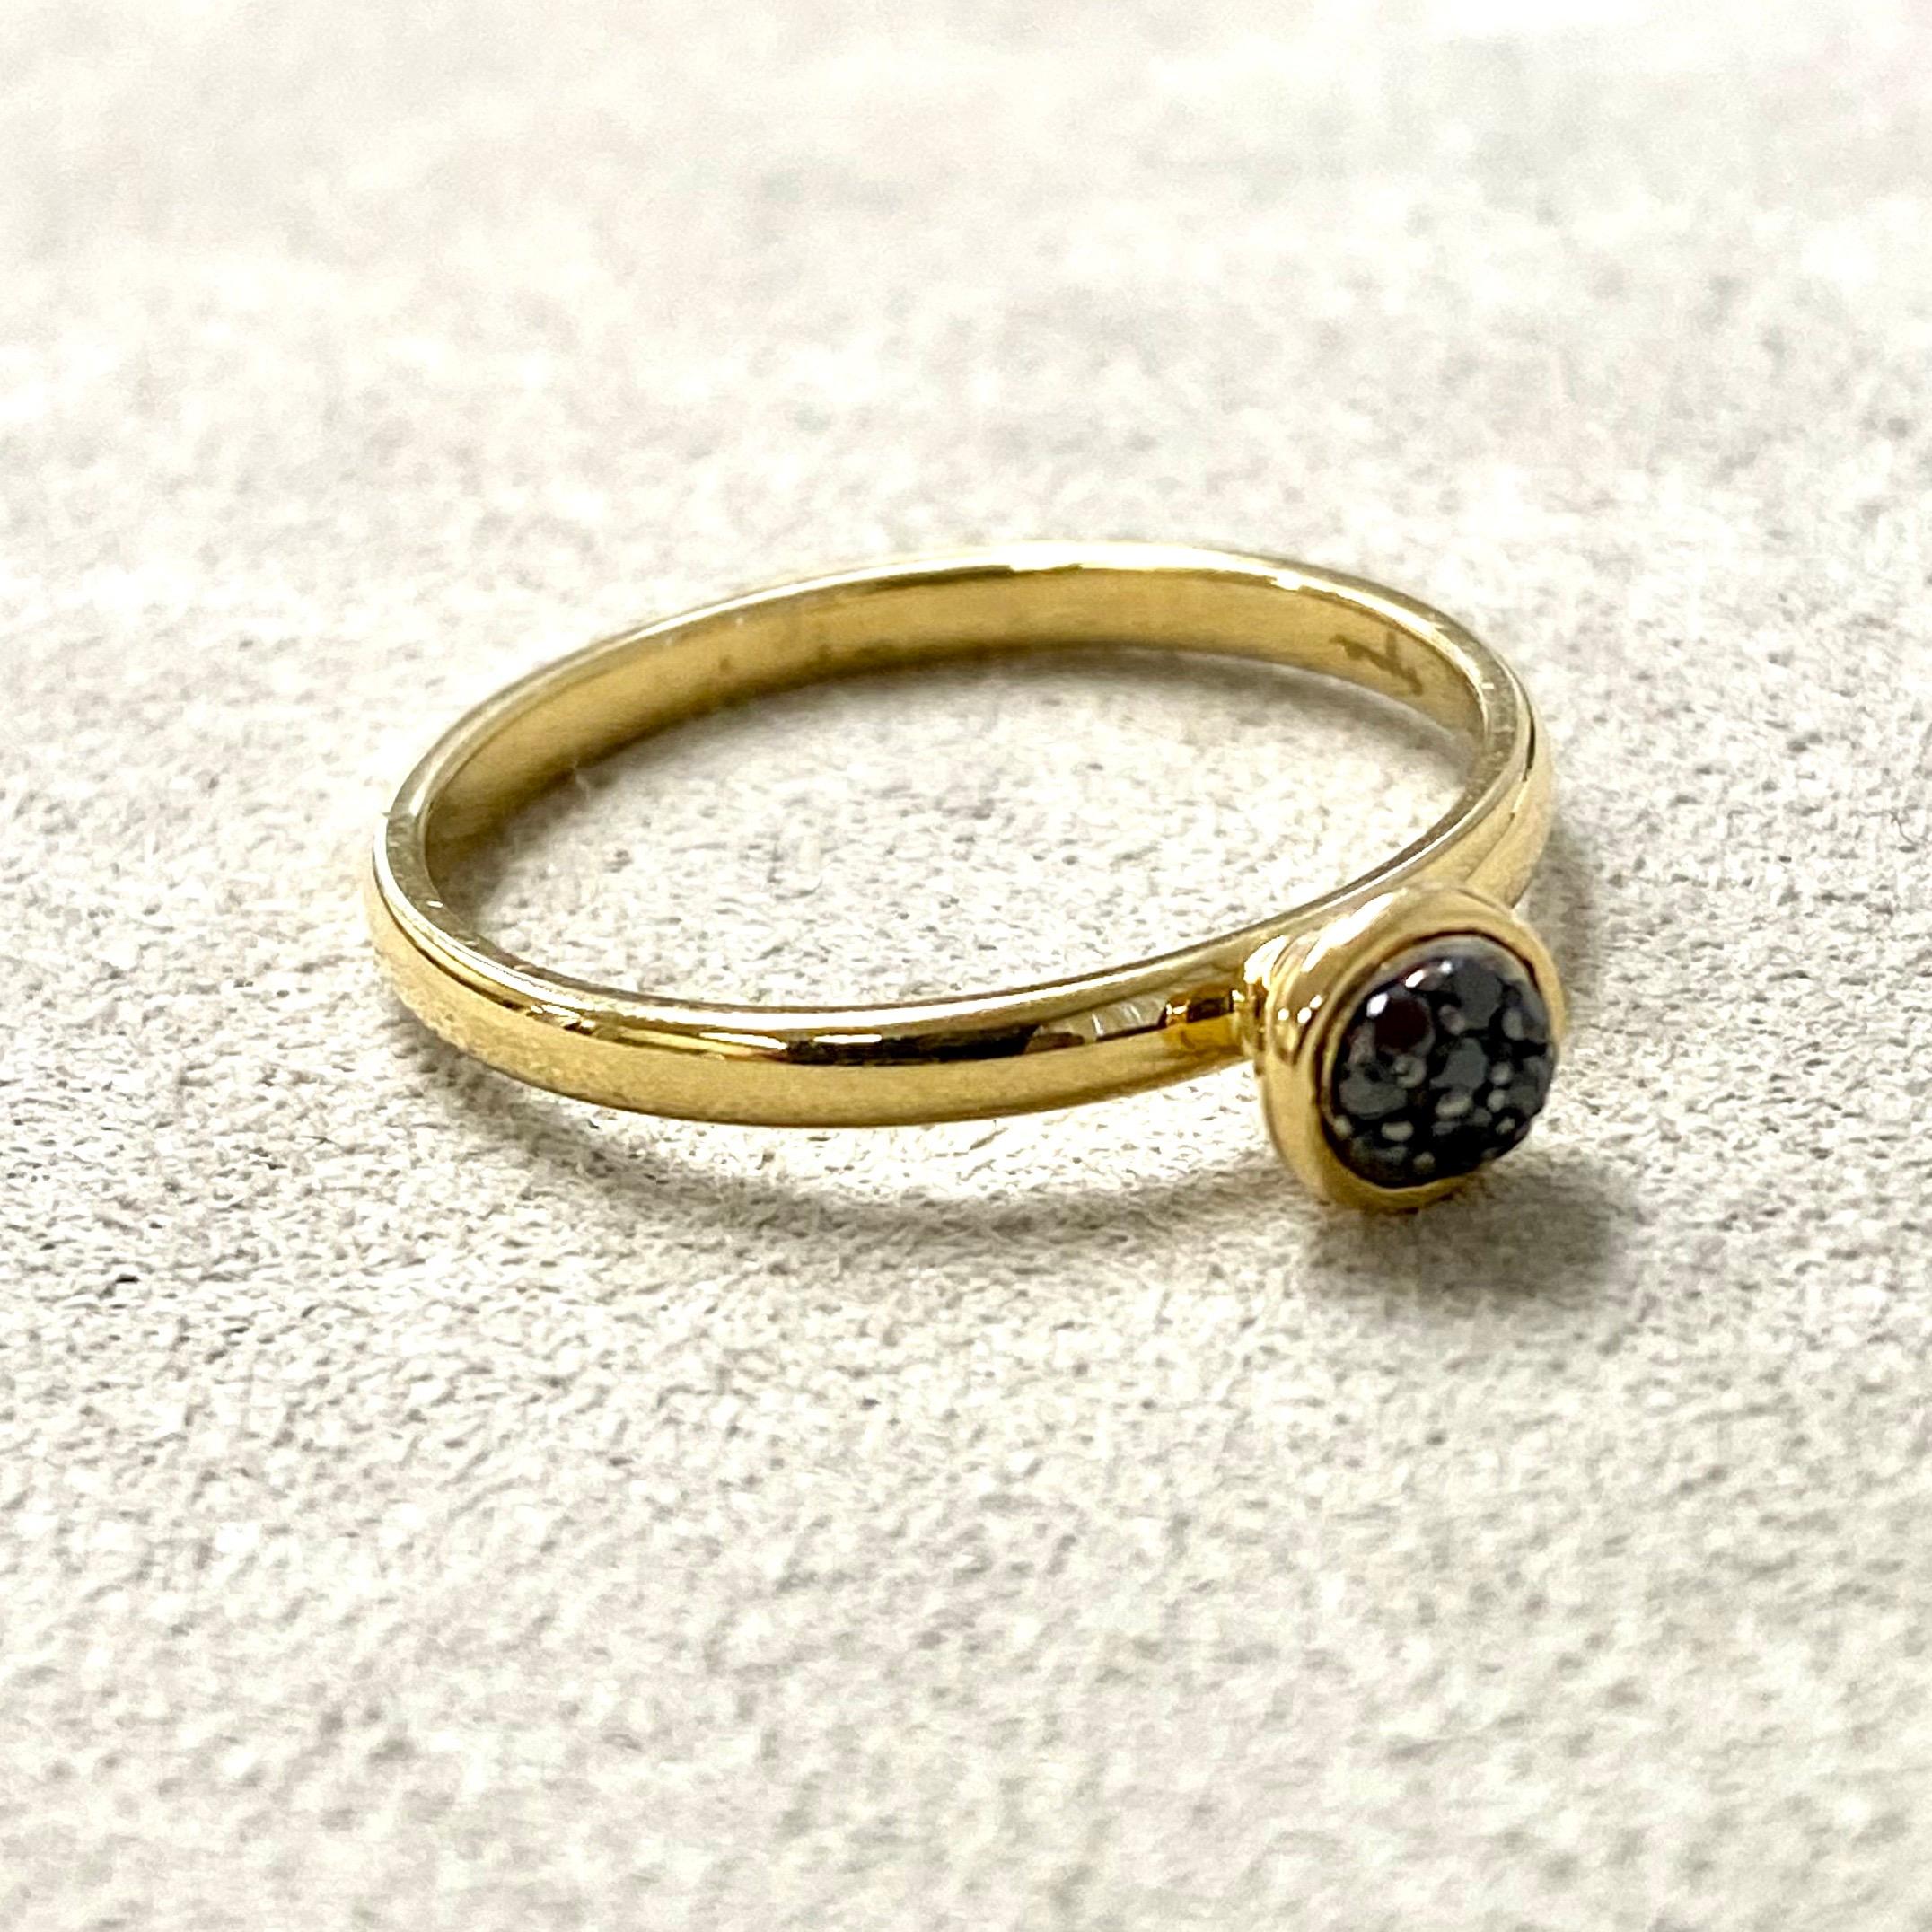 Created in 18 karat yellow gold
Black diamonds 0.10 carat approx.
Black diamond pave ring 5 mm diameter approx.
Ring size US 6.5, can be sized upon request.

Created in 18 karat yellow gold
Black diamonds 0.10 carat approx.
Black diamond pave ring 5